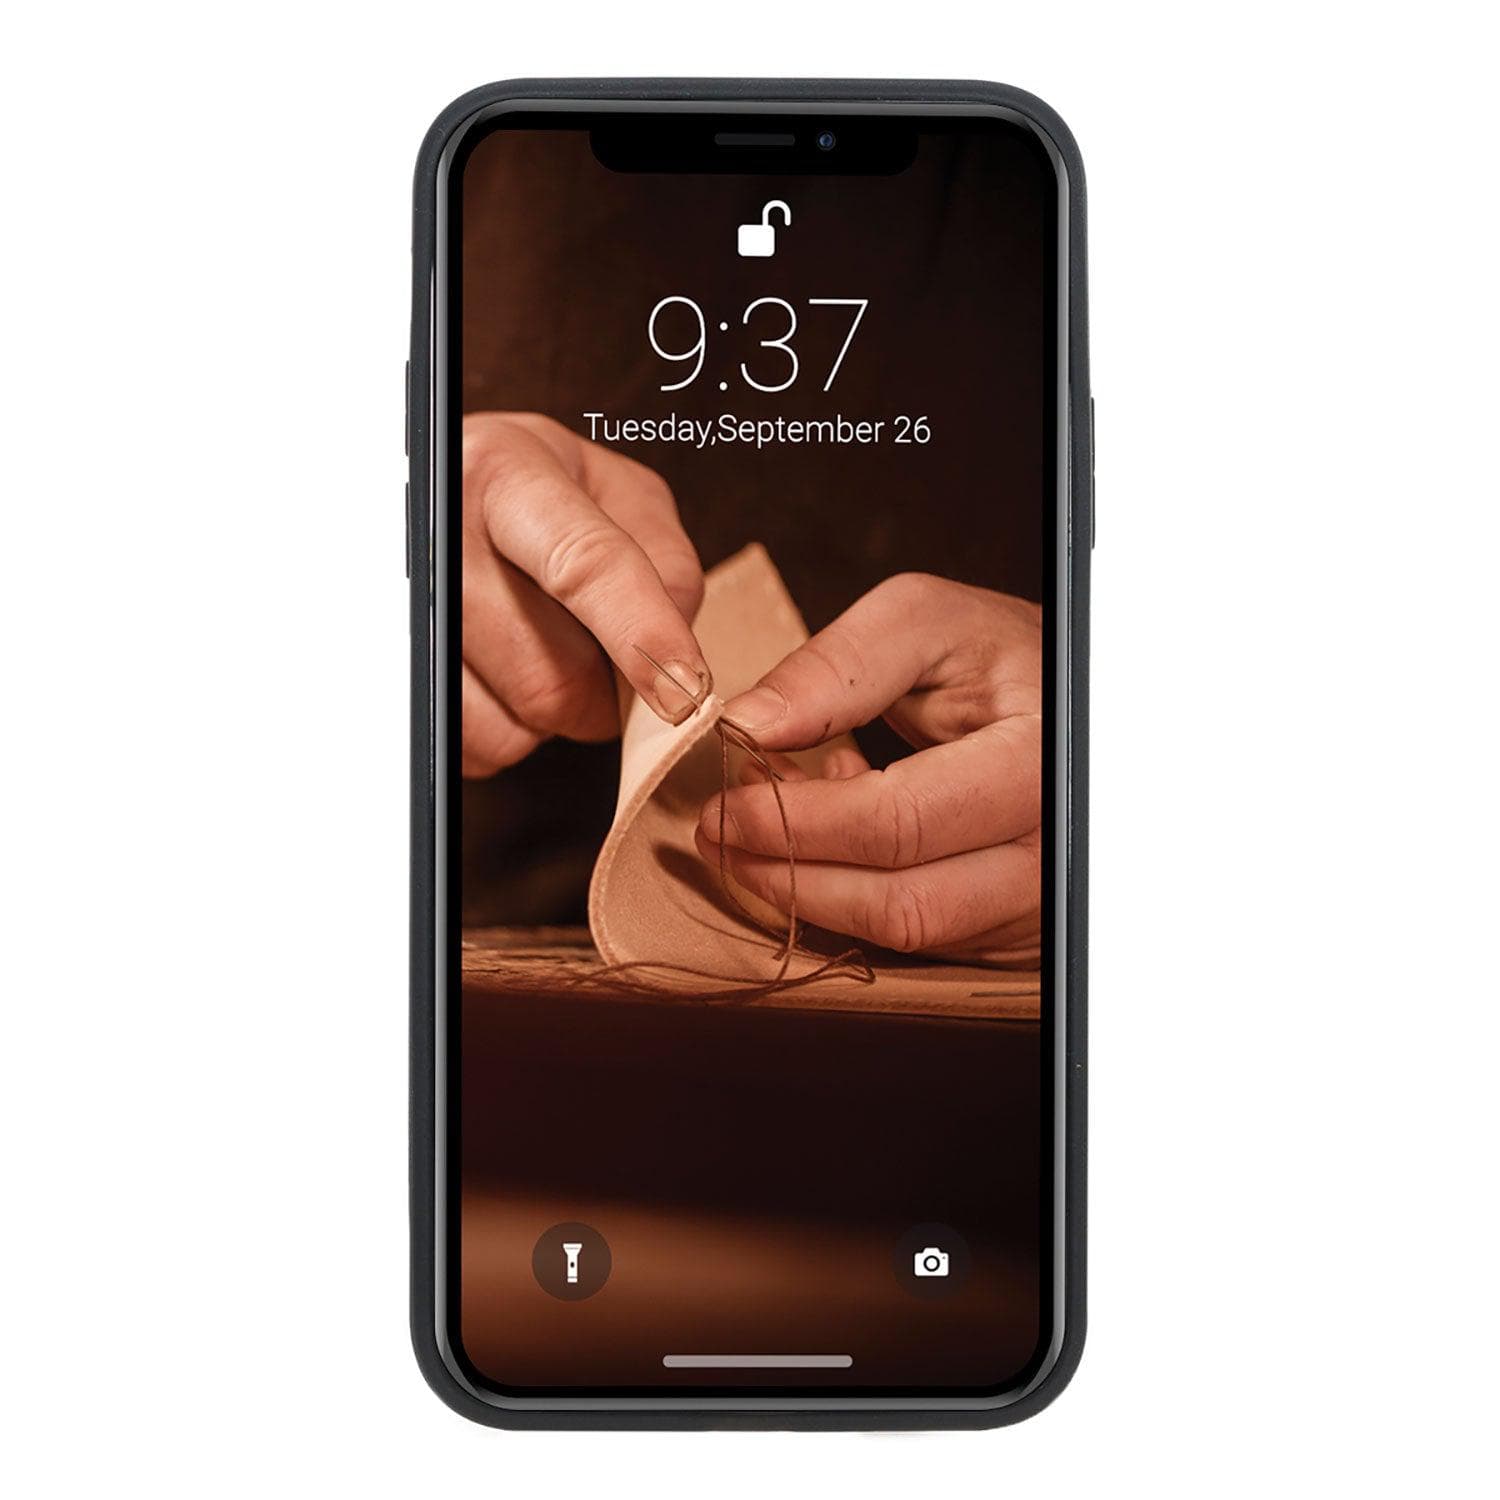 Flexible Leather Back Cover for Apple iPhone X Series Bouletta LTD